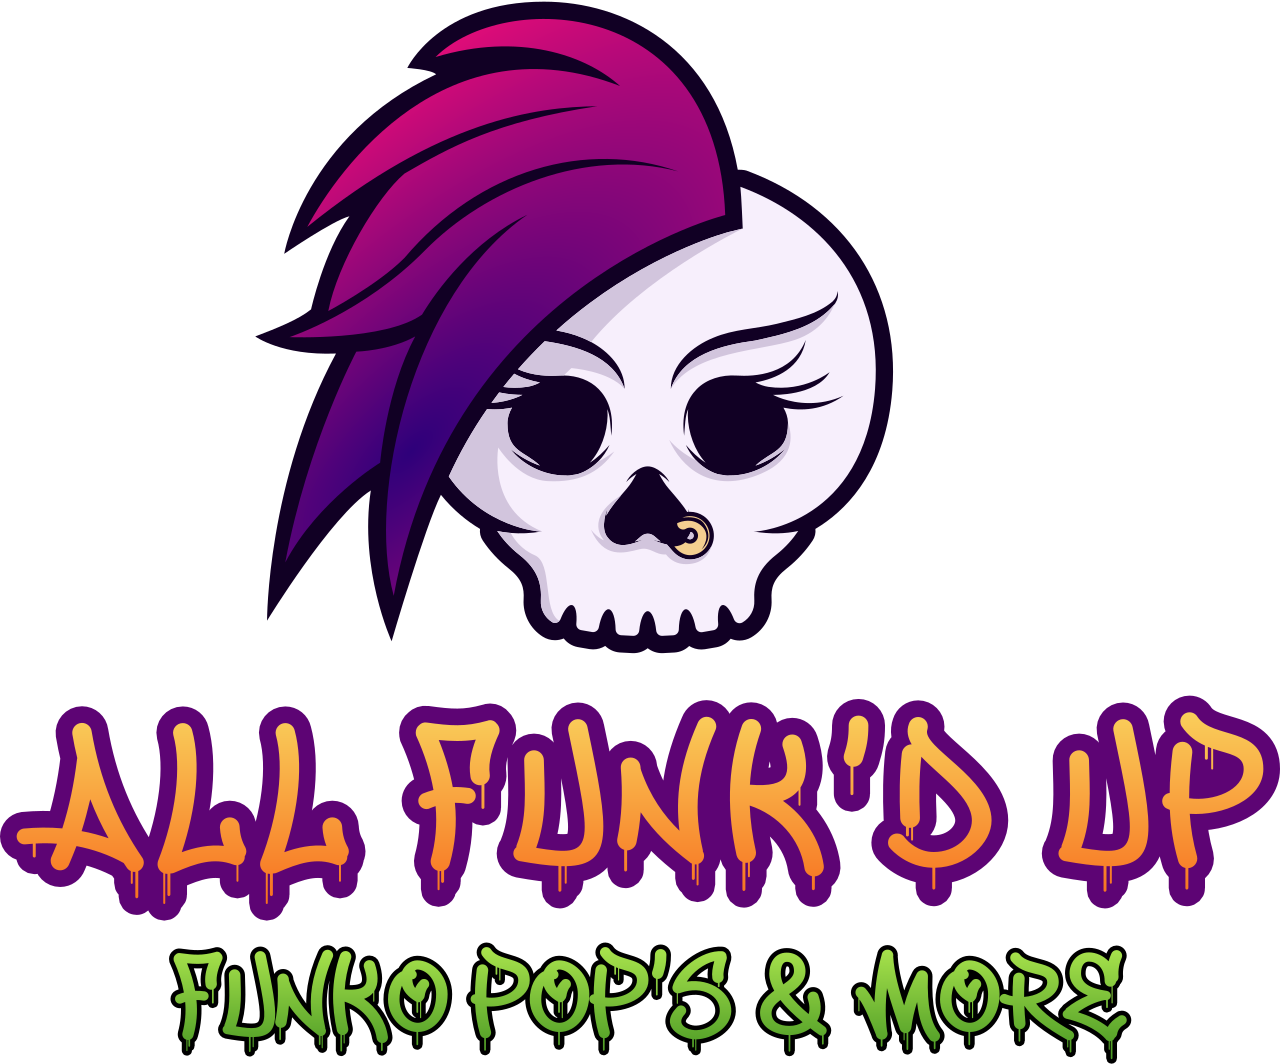 All Funk'd Up's logo